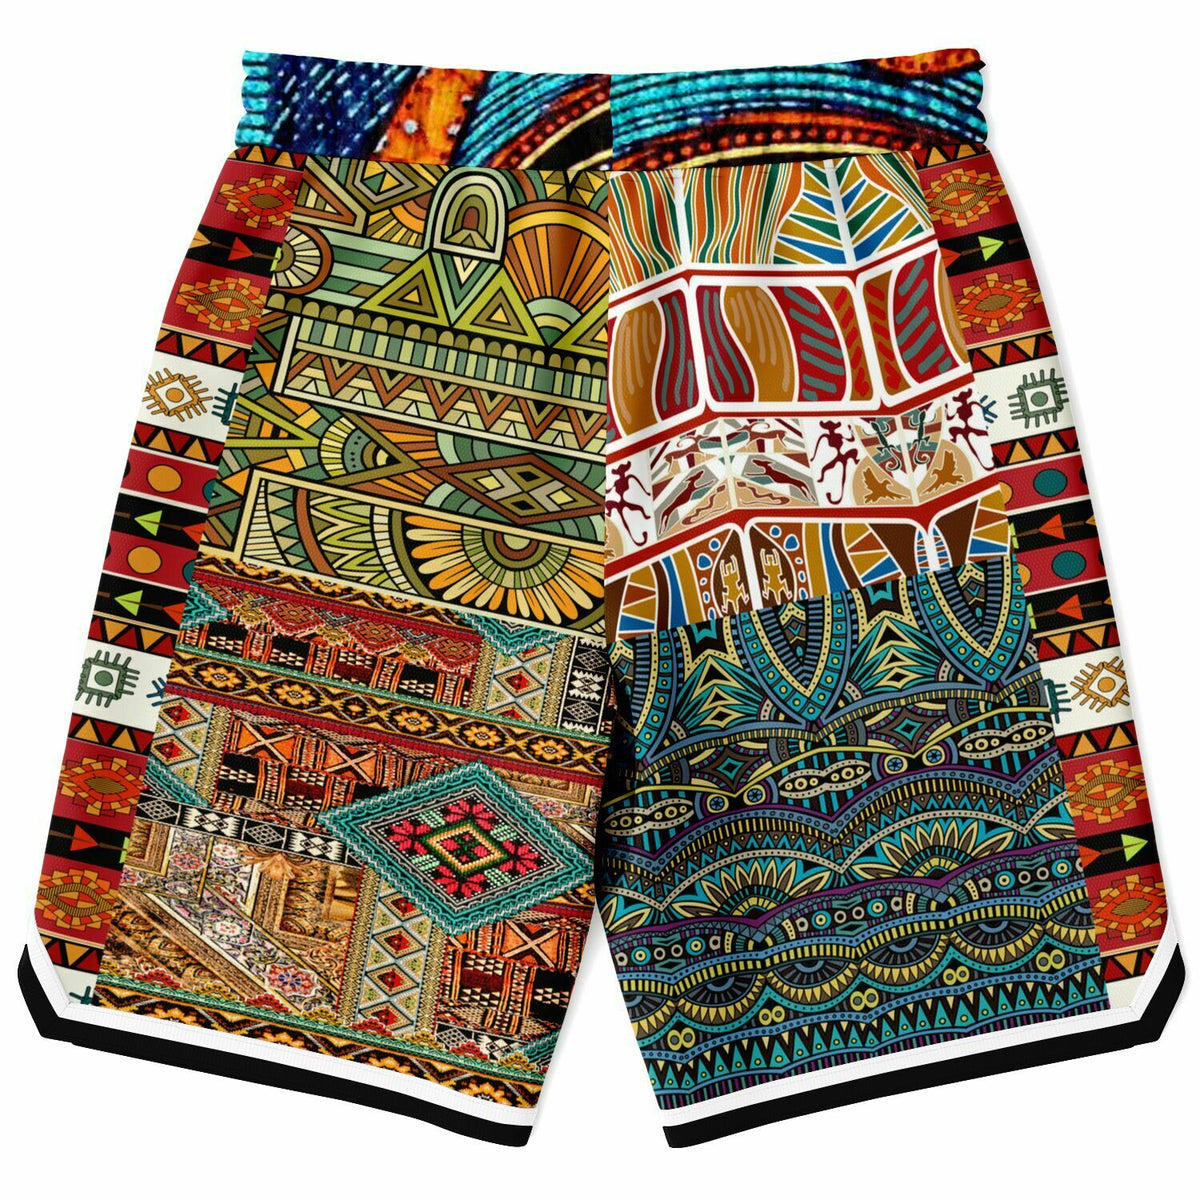 Dressed-Up Basketball Shorts: The Motherlode Of Awesome!